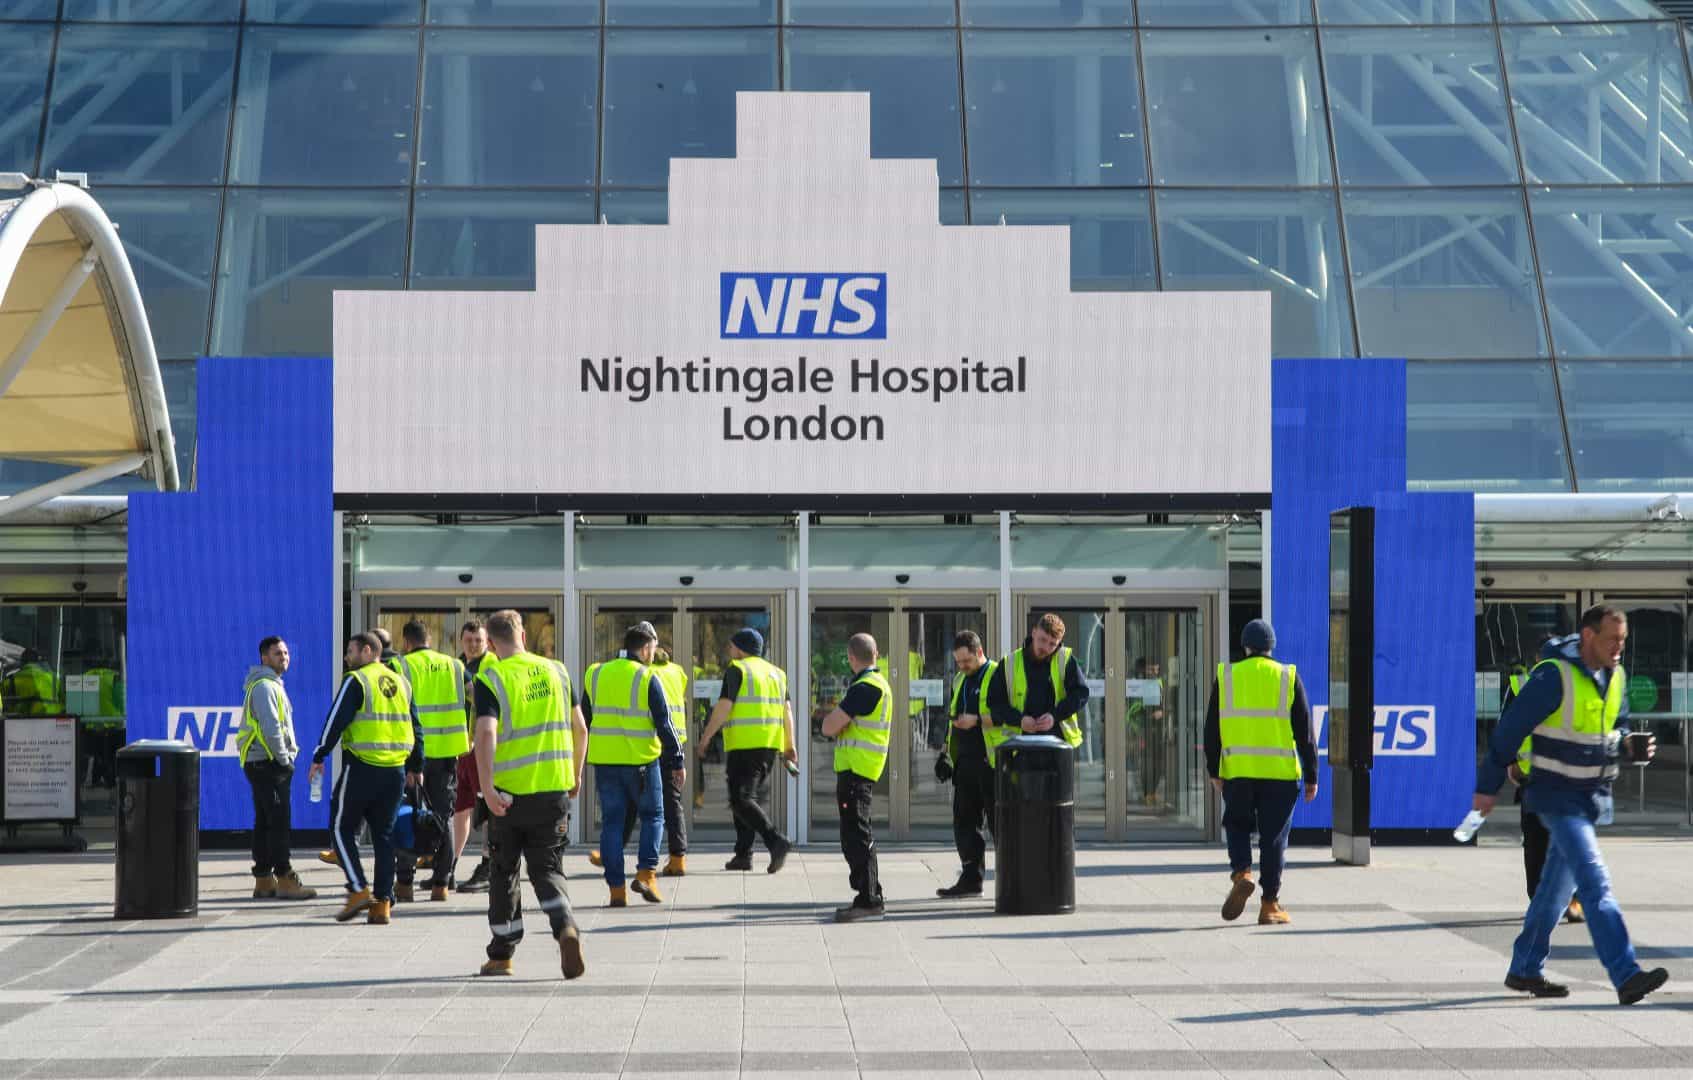 Nightingale hospital forced to turn down patient requests due to staffing shortages